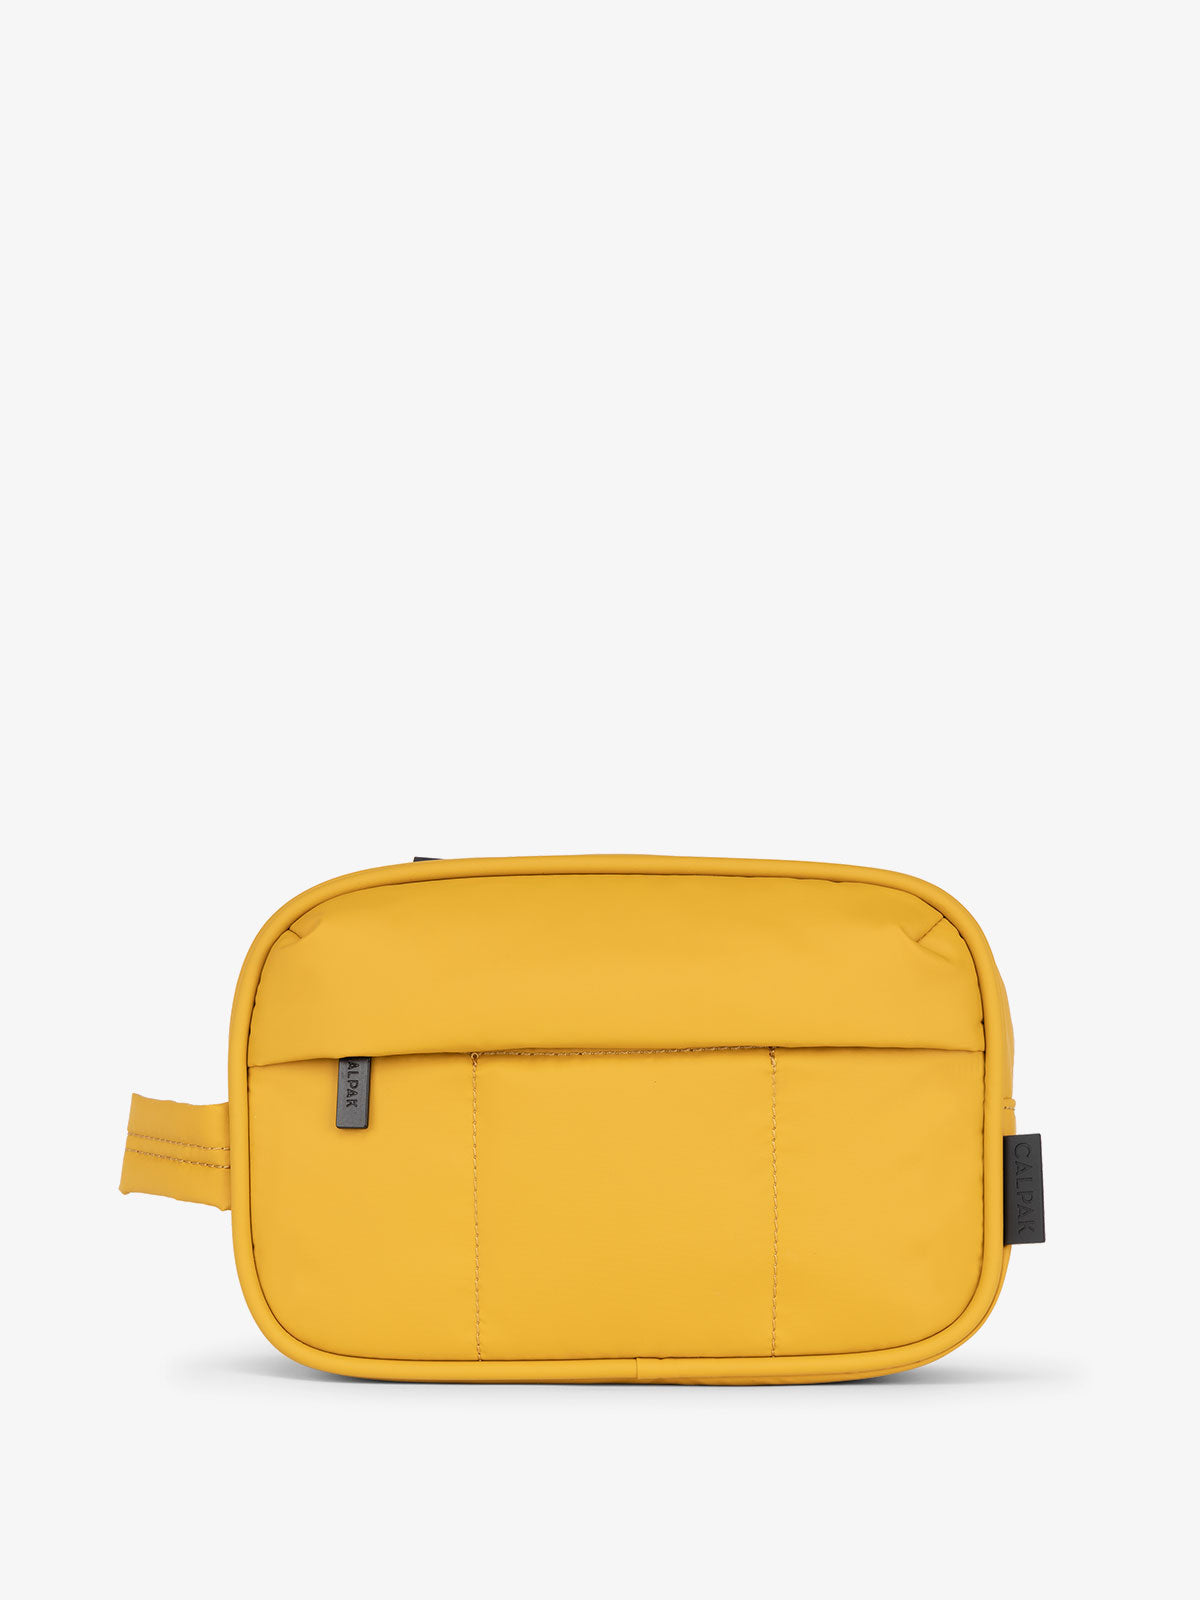 yellow soft toiletry bag